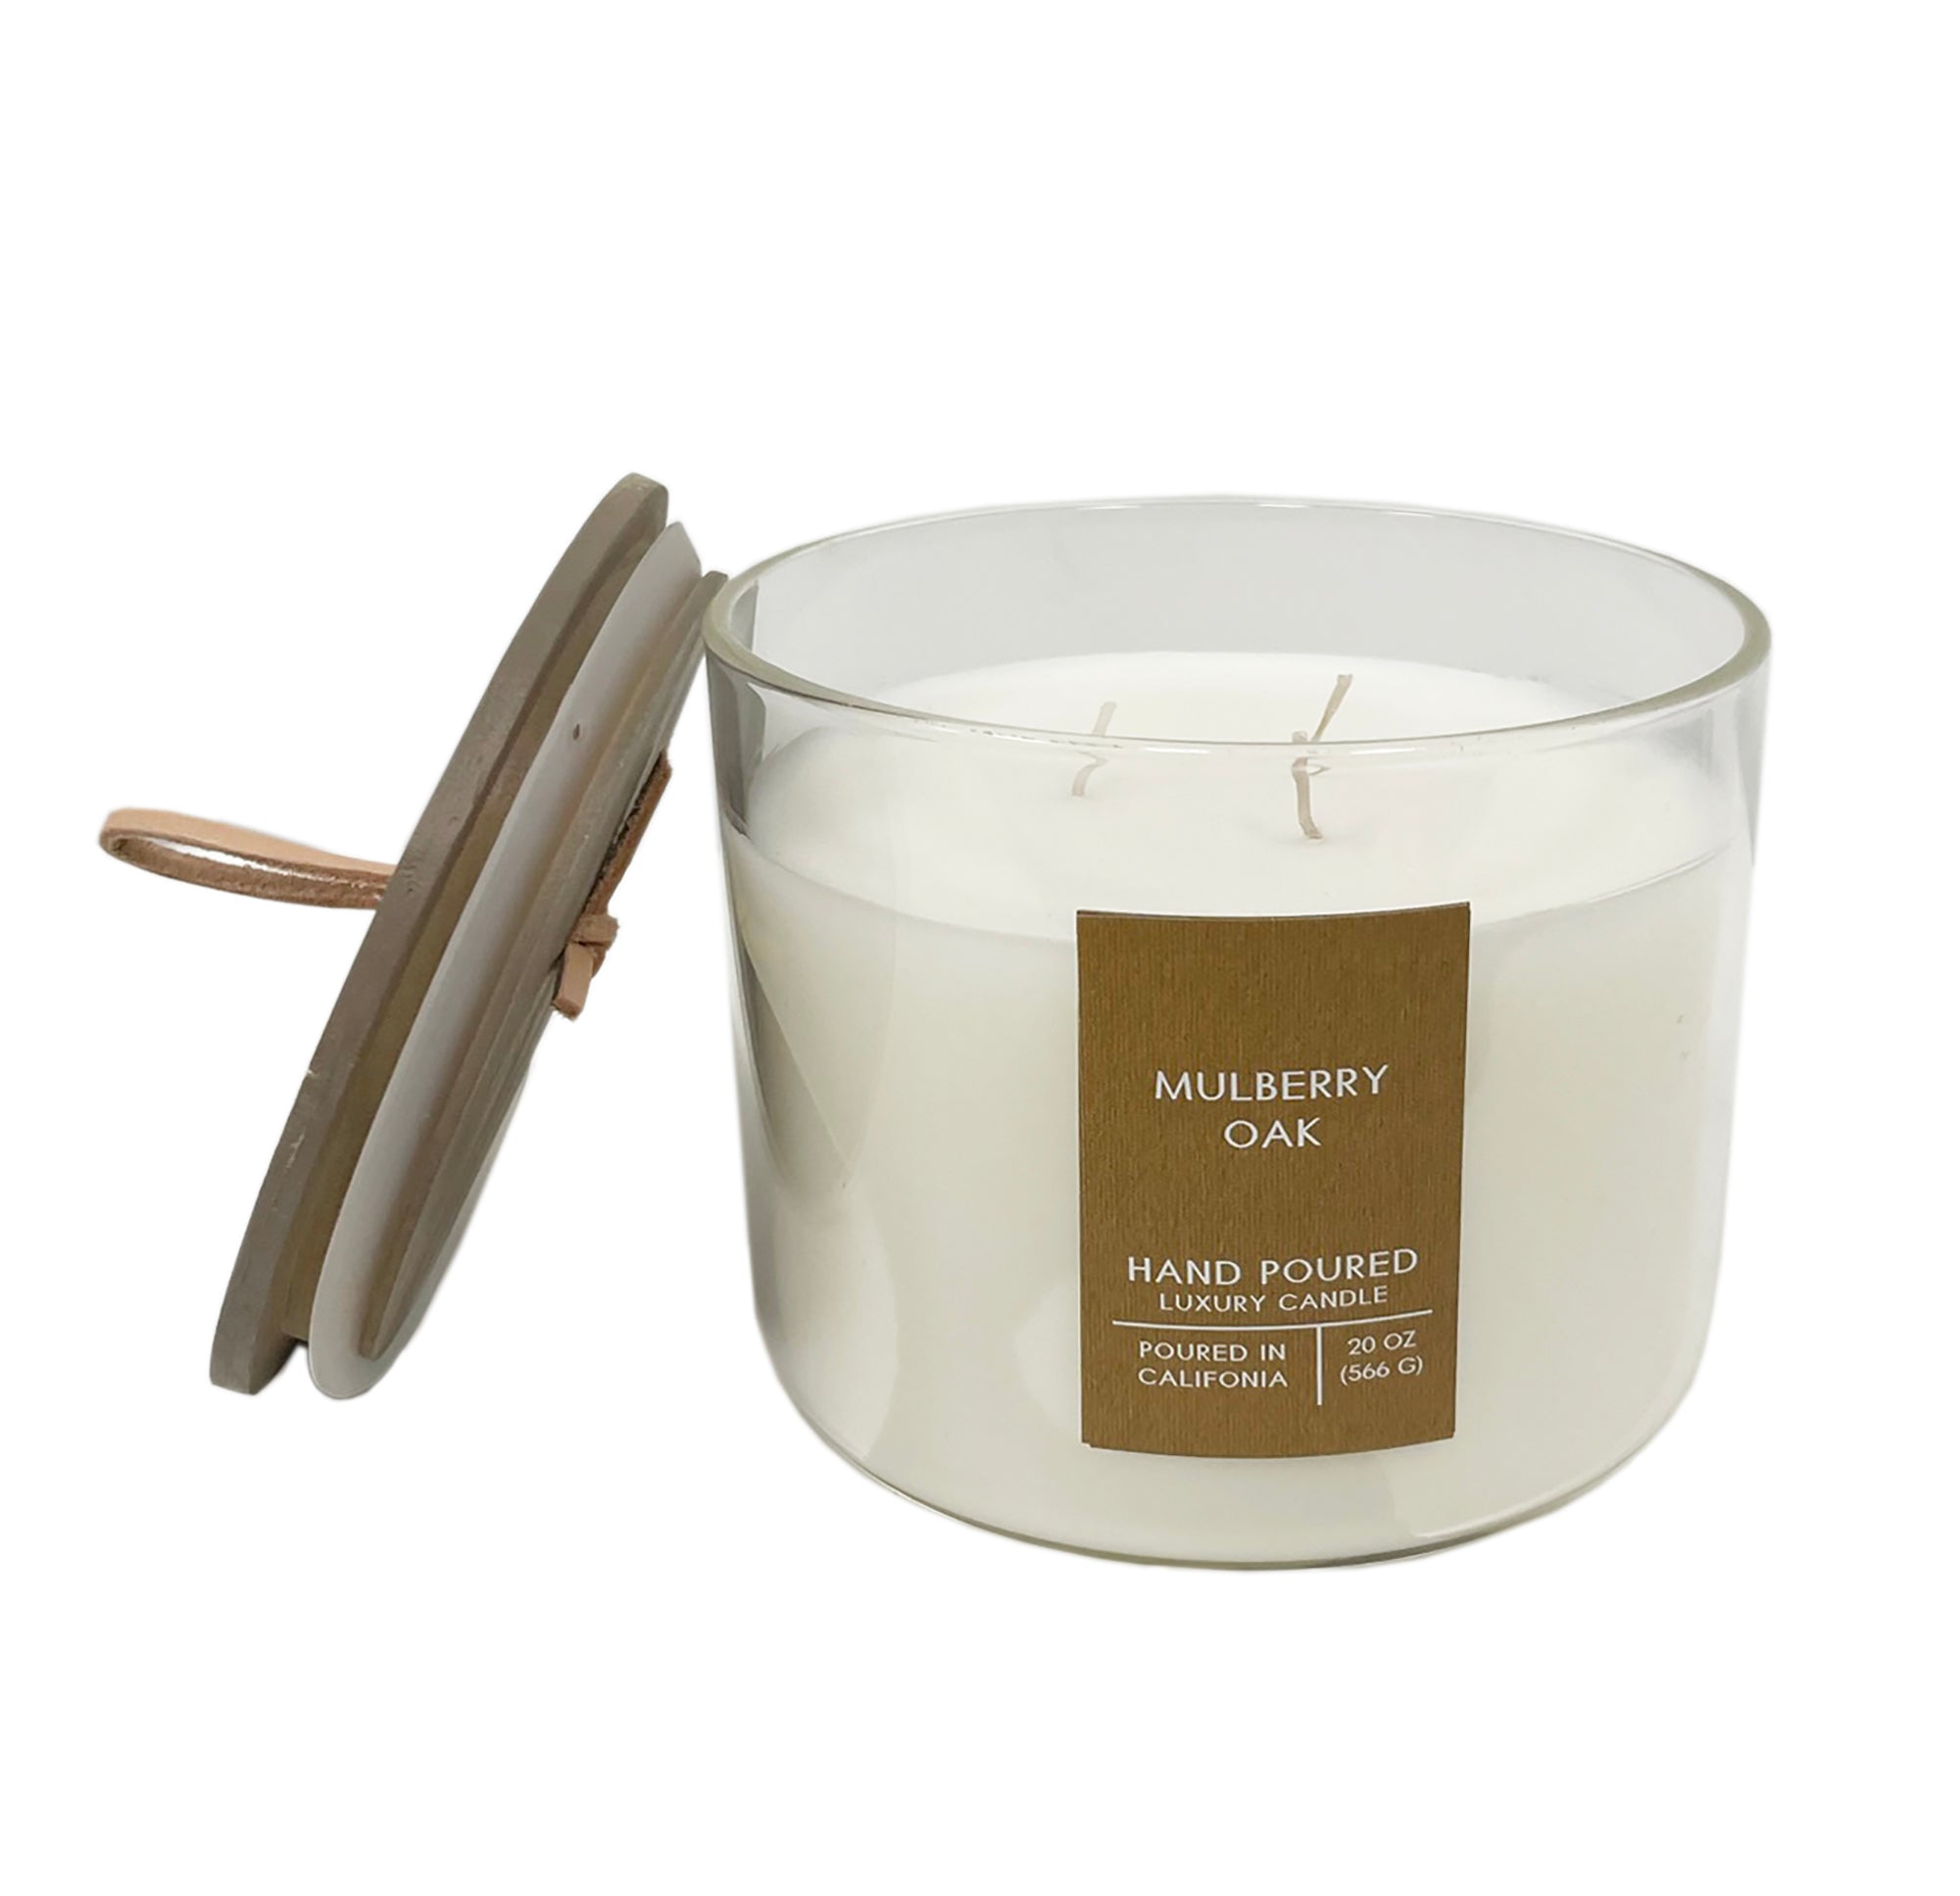 Mulberry Oak Botanical Tie 20 oz. Candle with Lid